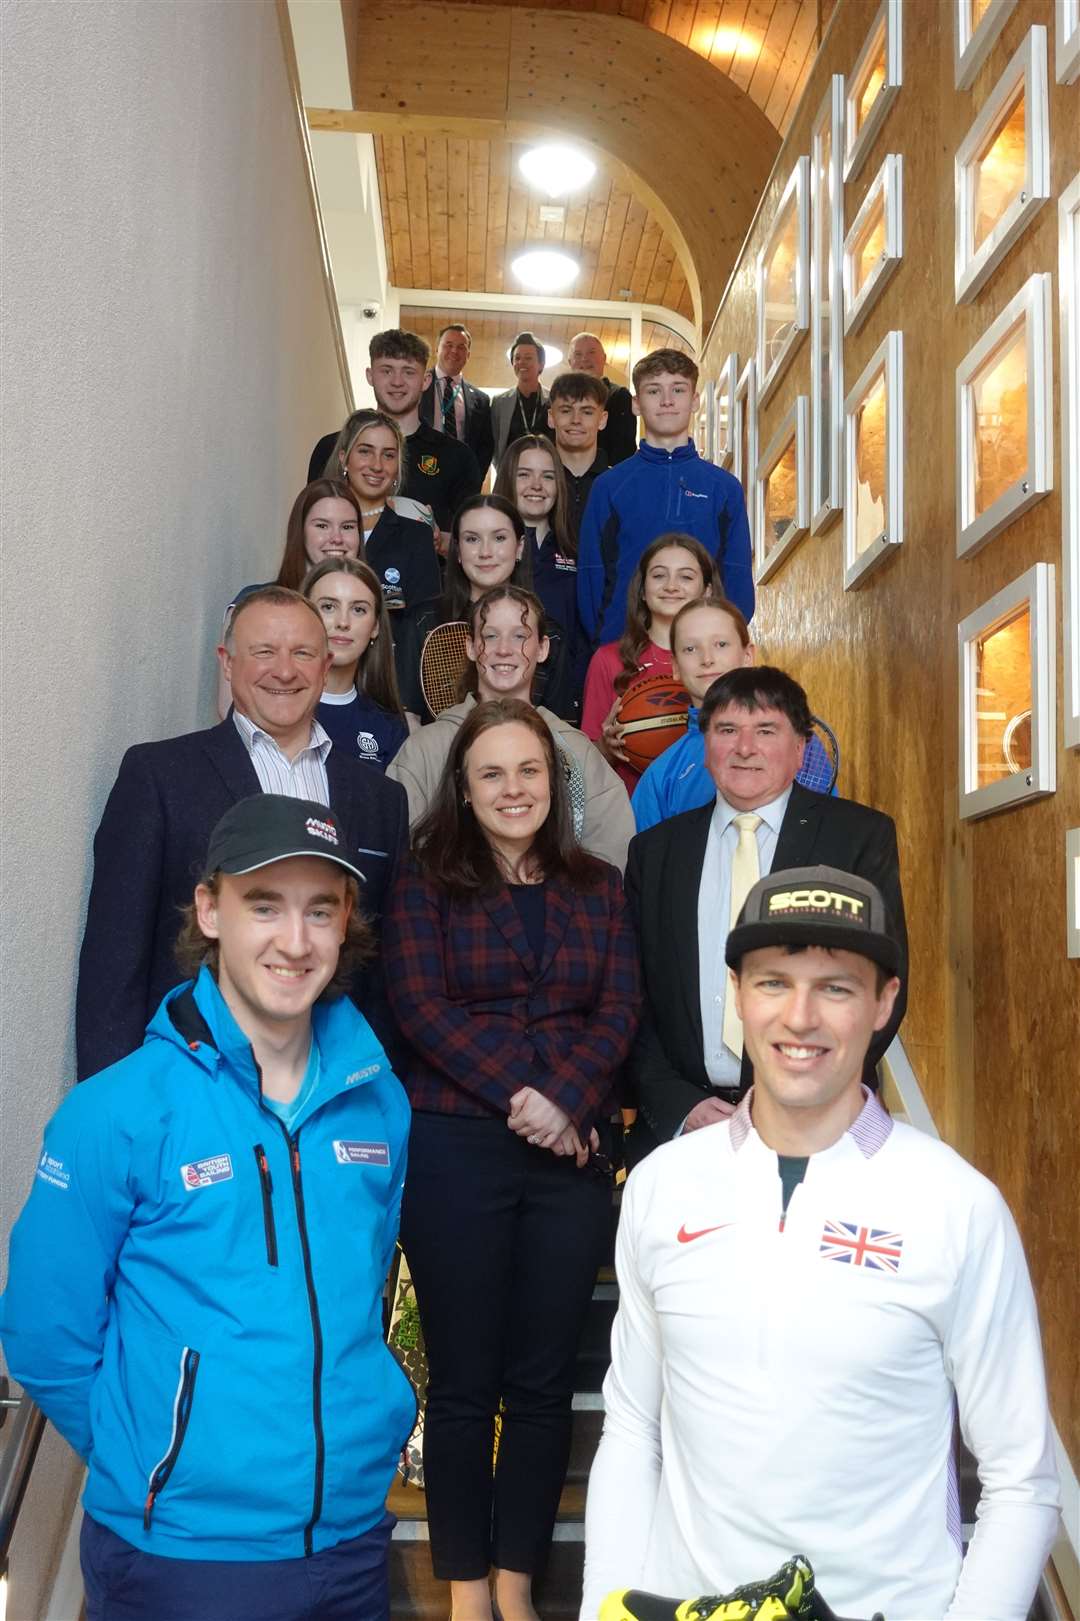 Highland ATAS recipients pictured with Drew Hendry MP, Kate Forbes MSP, Highland Councillor Ken Gowans (second row). Steve Walsh, HLH Chief Executive, Nicky Grant, The Highland Council, Executive Chief Officer, Gary Reid, sportscotland, Regional Manager (Back row).